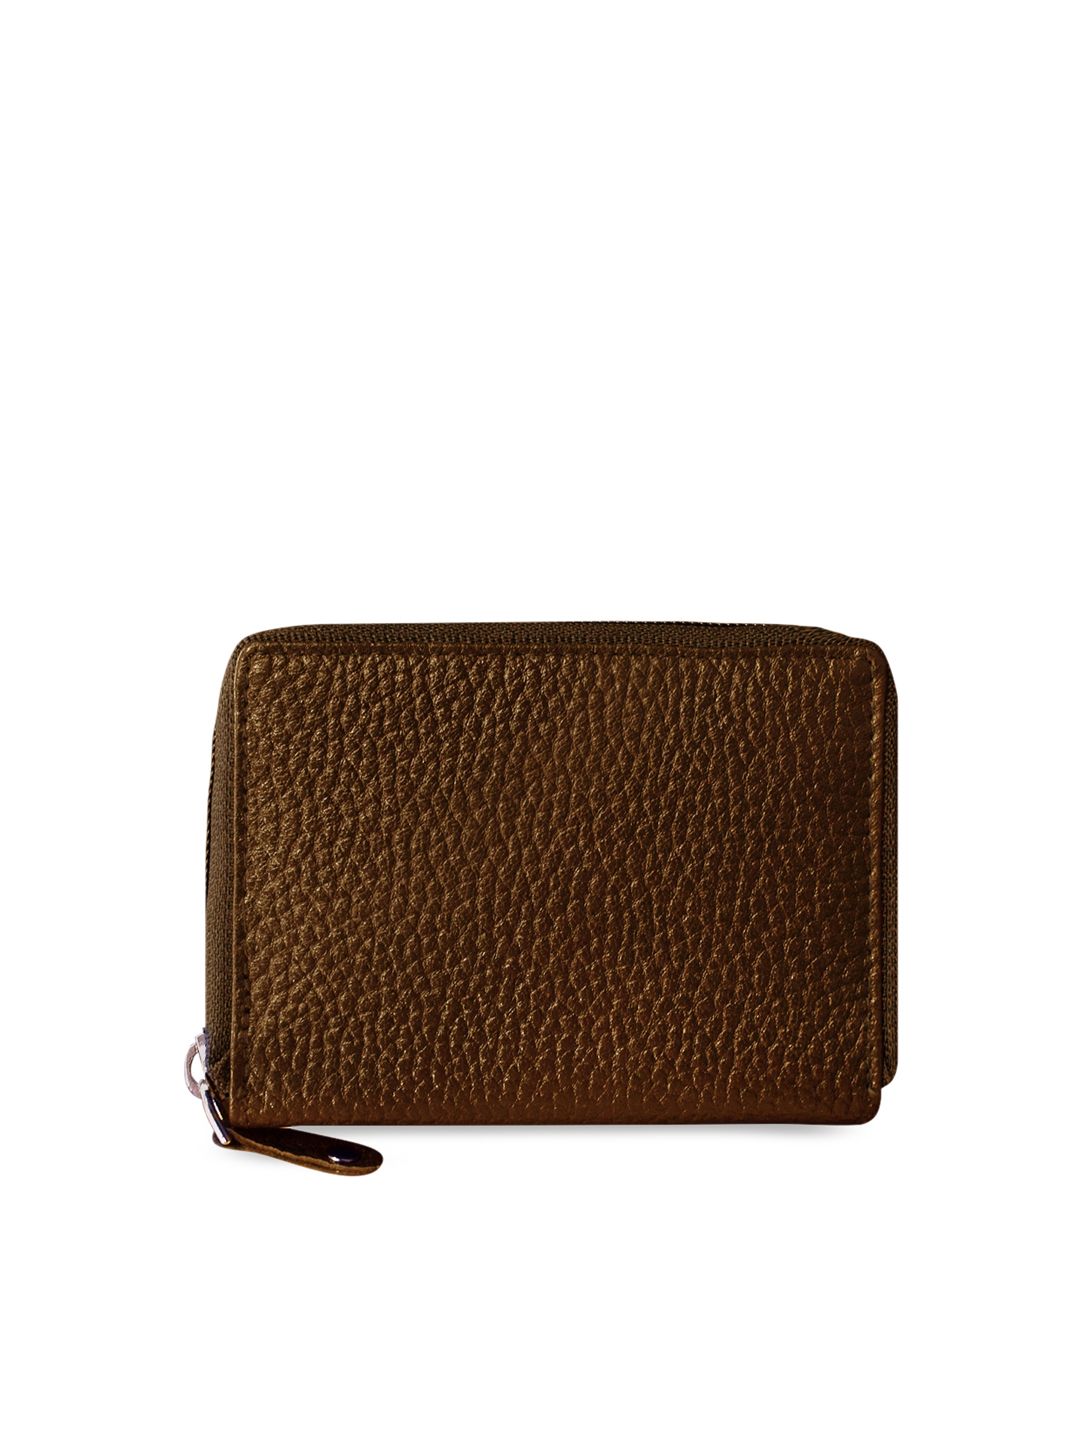 ABYS Unisex Tan Textured Leather Card Holder Price in India